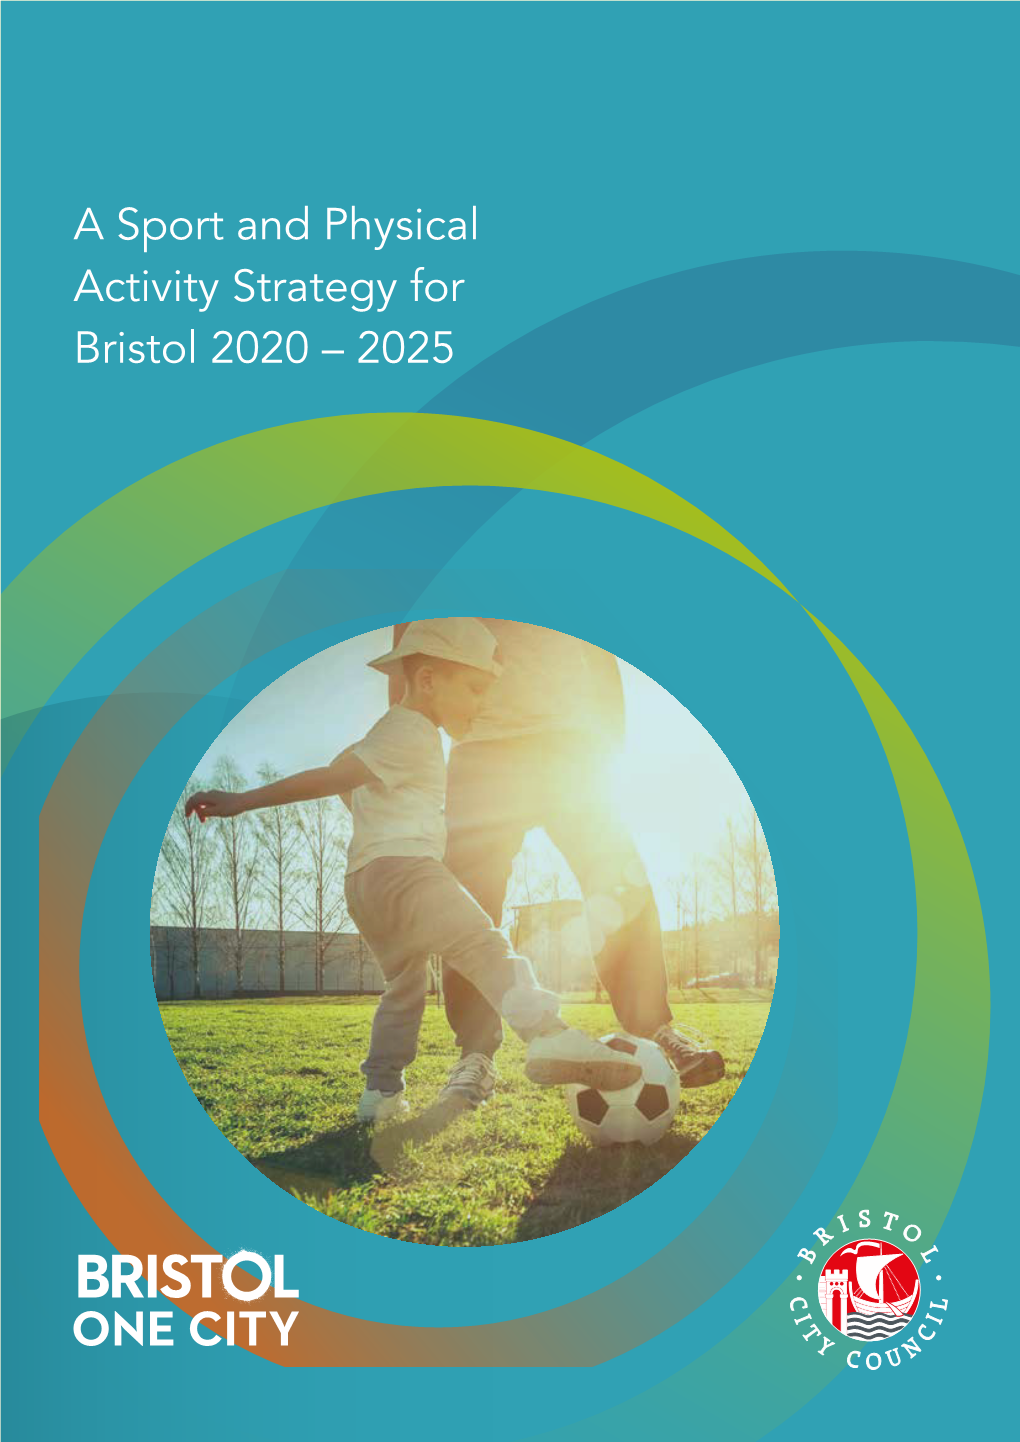 A Sport and Physical Activity Strategy for Bristol 2020 – 2025